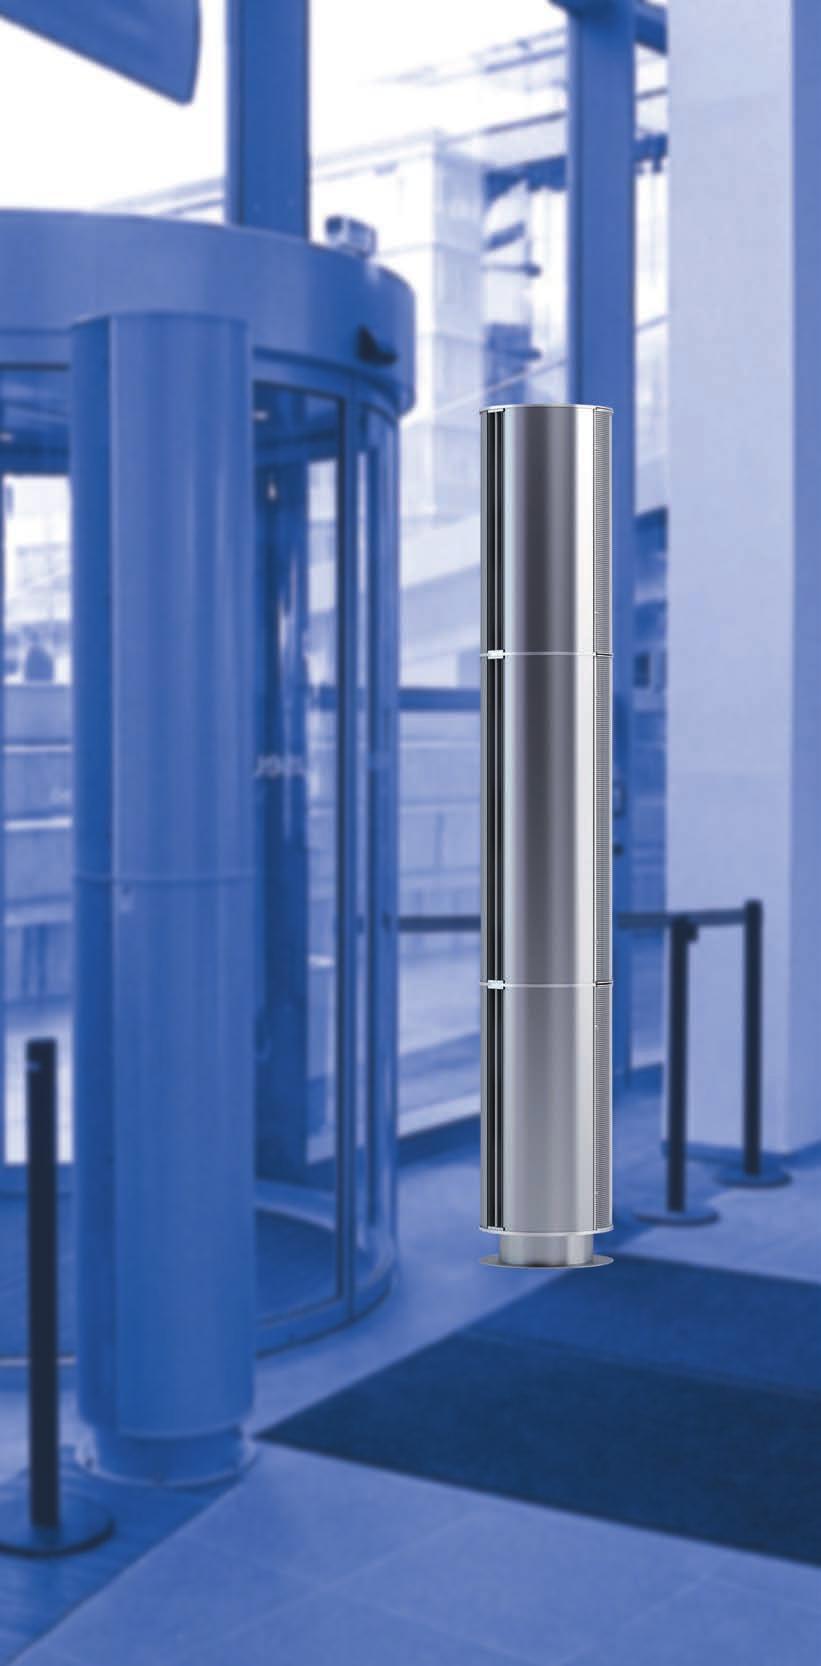 TTL-TWISTO Door air curtain - against cold and draft with proven technology TTL-TWISTO the energy saving air curtain for open doors and passages.